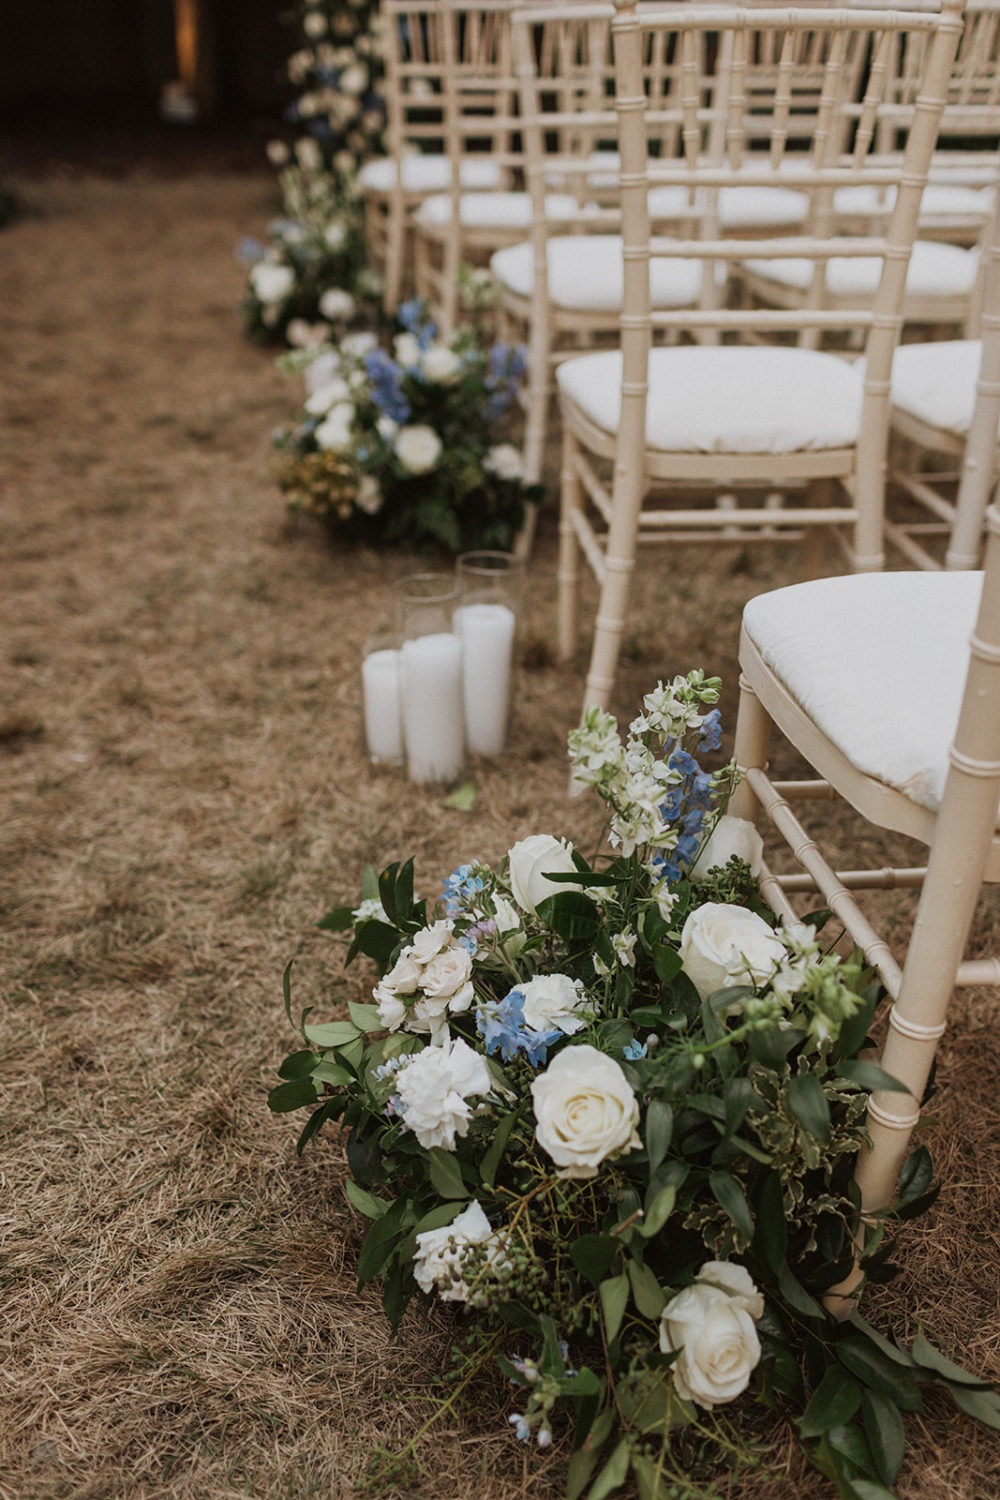 white and blue wedding flowers by white candles at wedding ceremony